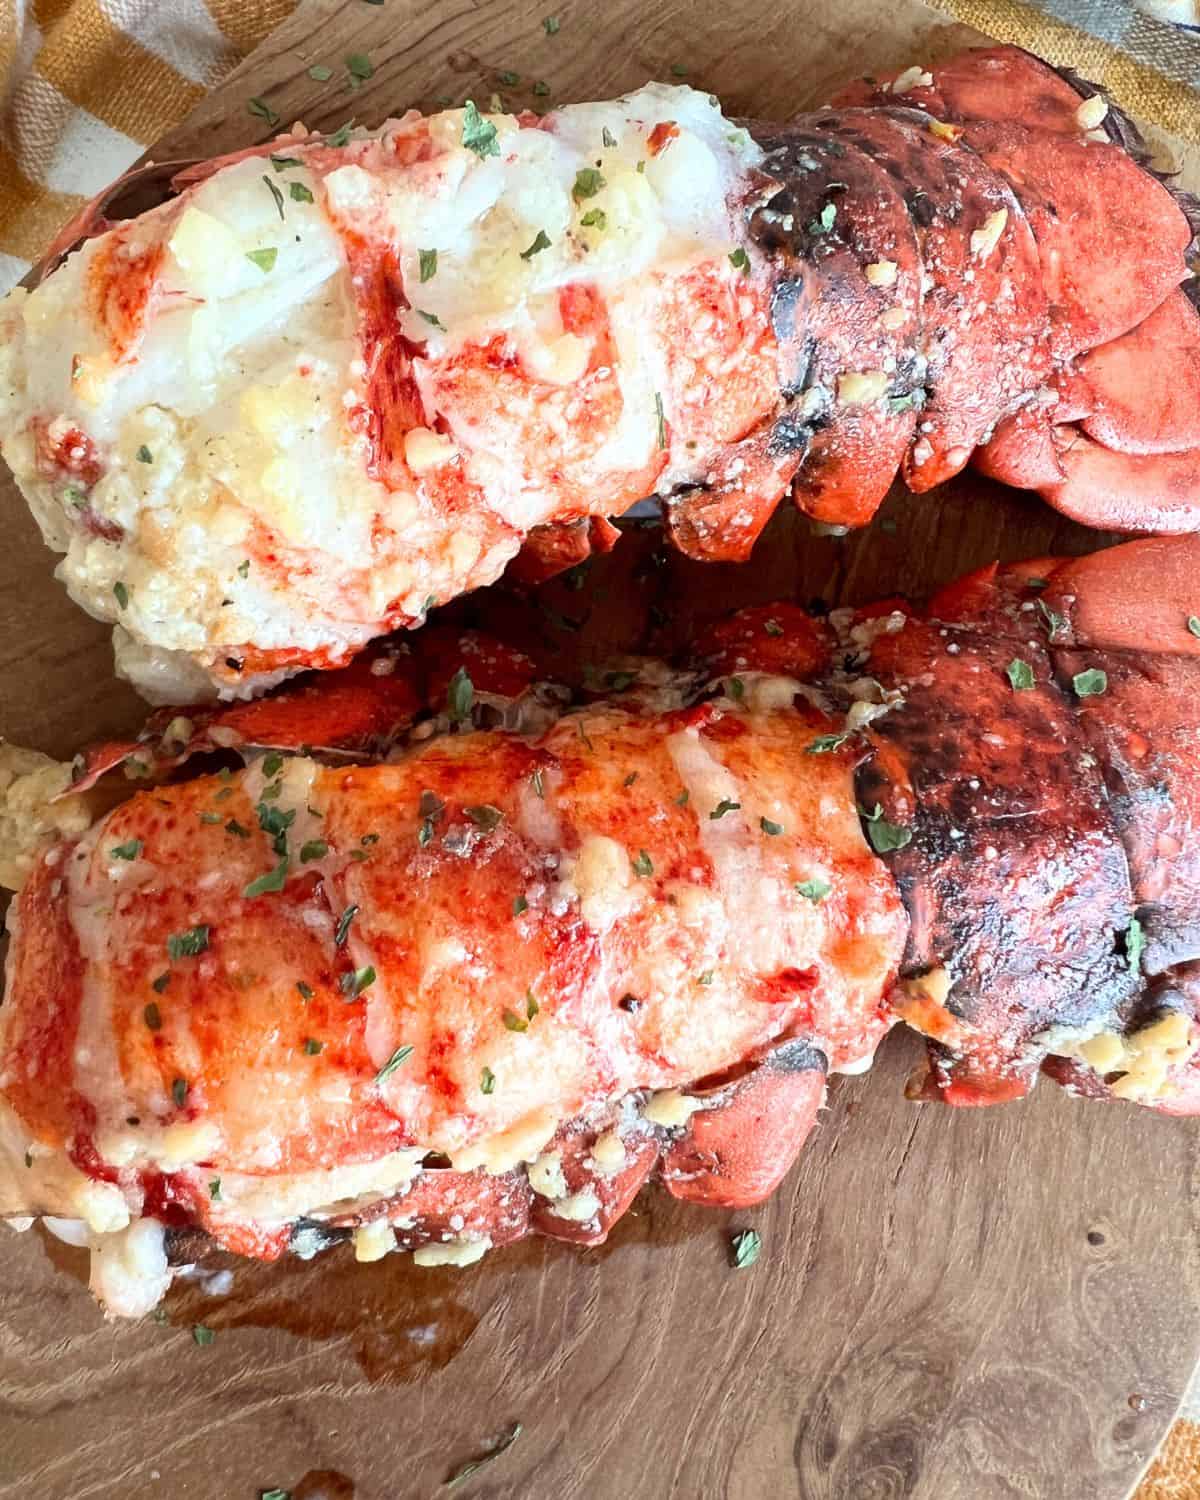 Baked lobster tails coated in garlic butter sauce on a wooden cutting board. 